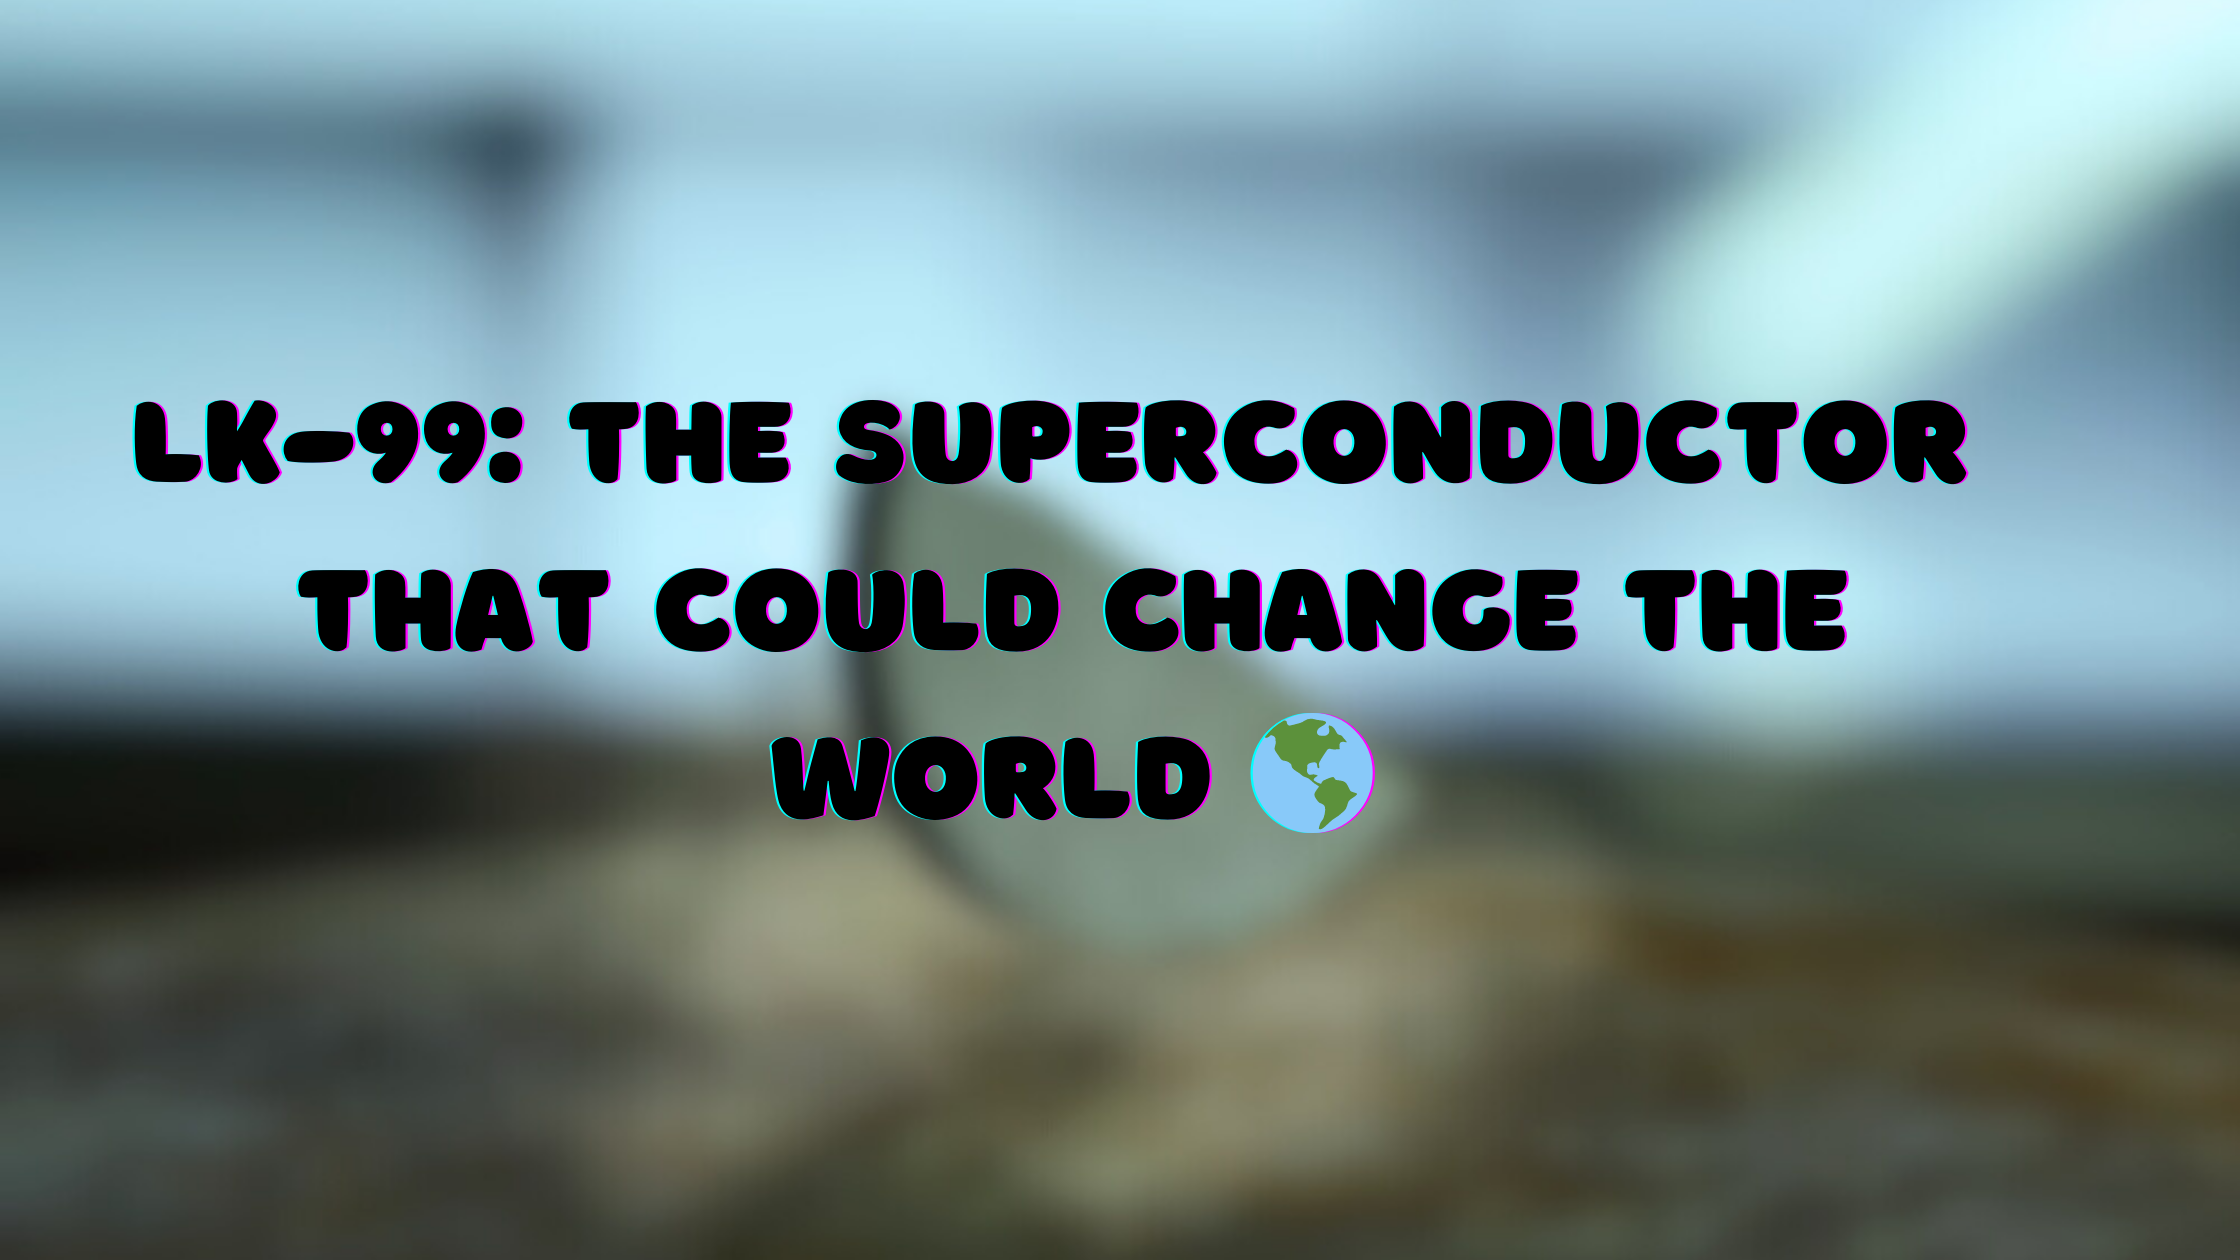 LK-99 The Superconductor That Could Change the World 🌎